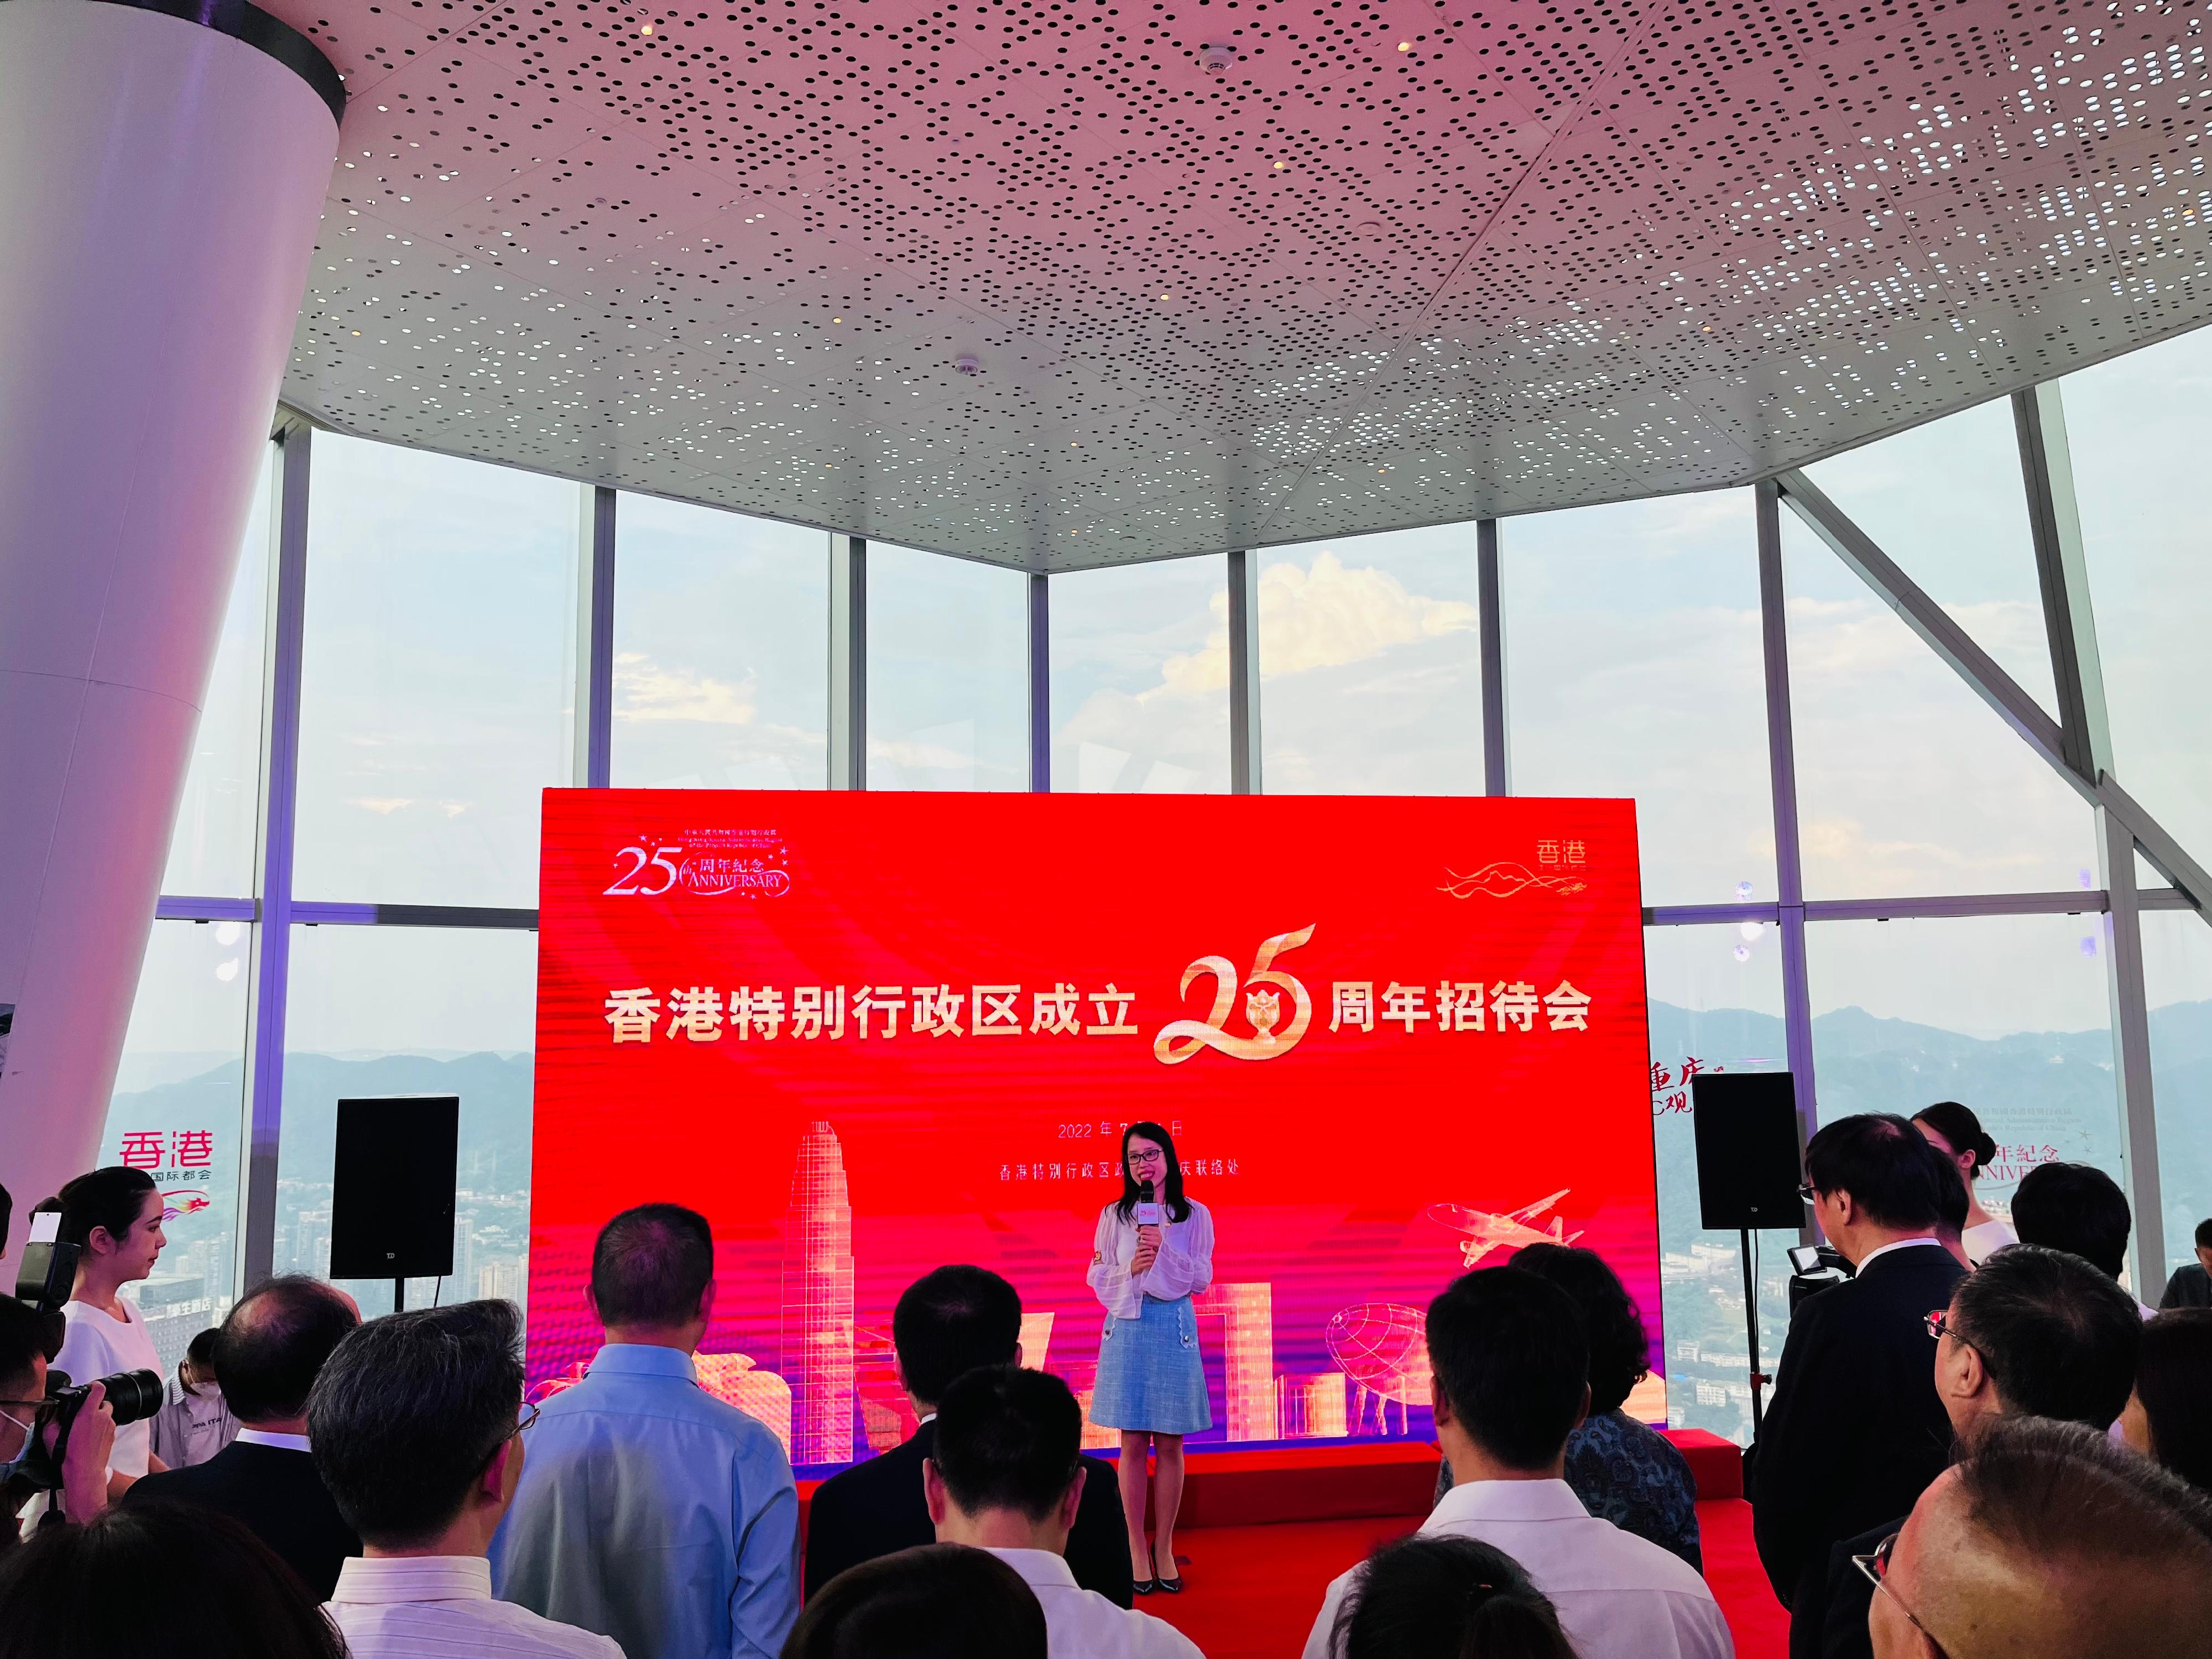 The Hong Kong Economic and Trade Office in Chengdu (CDETO) of the Government of the Hong Kong Special Administrative Region (HKSAR) has been holding a series of celebration activities since June to mark the 25th anniversary of the establishment of the HKSAR. Photo shows the Director of the CDETO, Miss Li Wan-in, speaking at a reception in Chongqing on July 1.